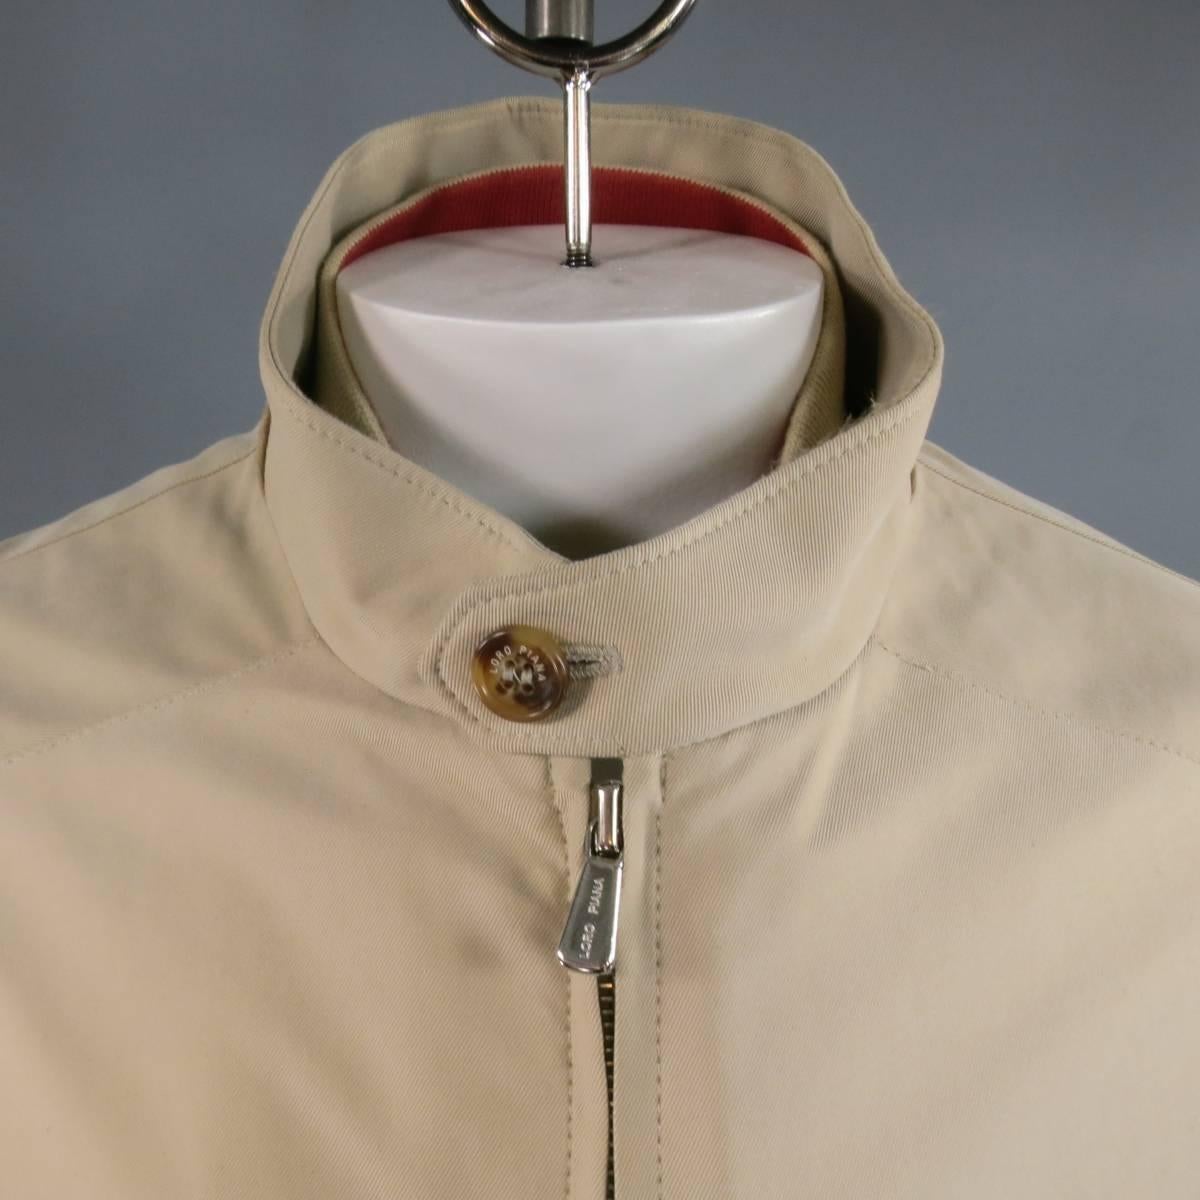 Classic LORO PIANA coat in khaki twill featuring a high neck with button tab, zip up front, slated zip pockets, button cuffs, embroidered tan suede neck decal, and detachable zip quilted vest. Made in Italy.
 
Excellent Pre-Owned Condition.
Marked